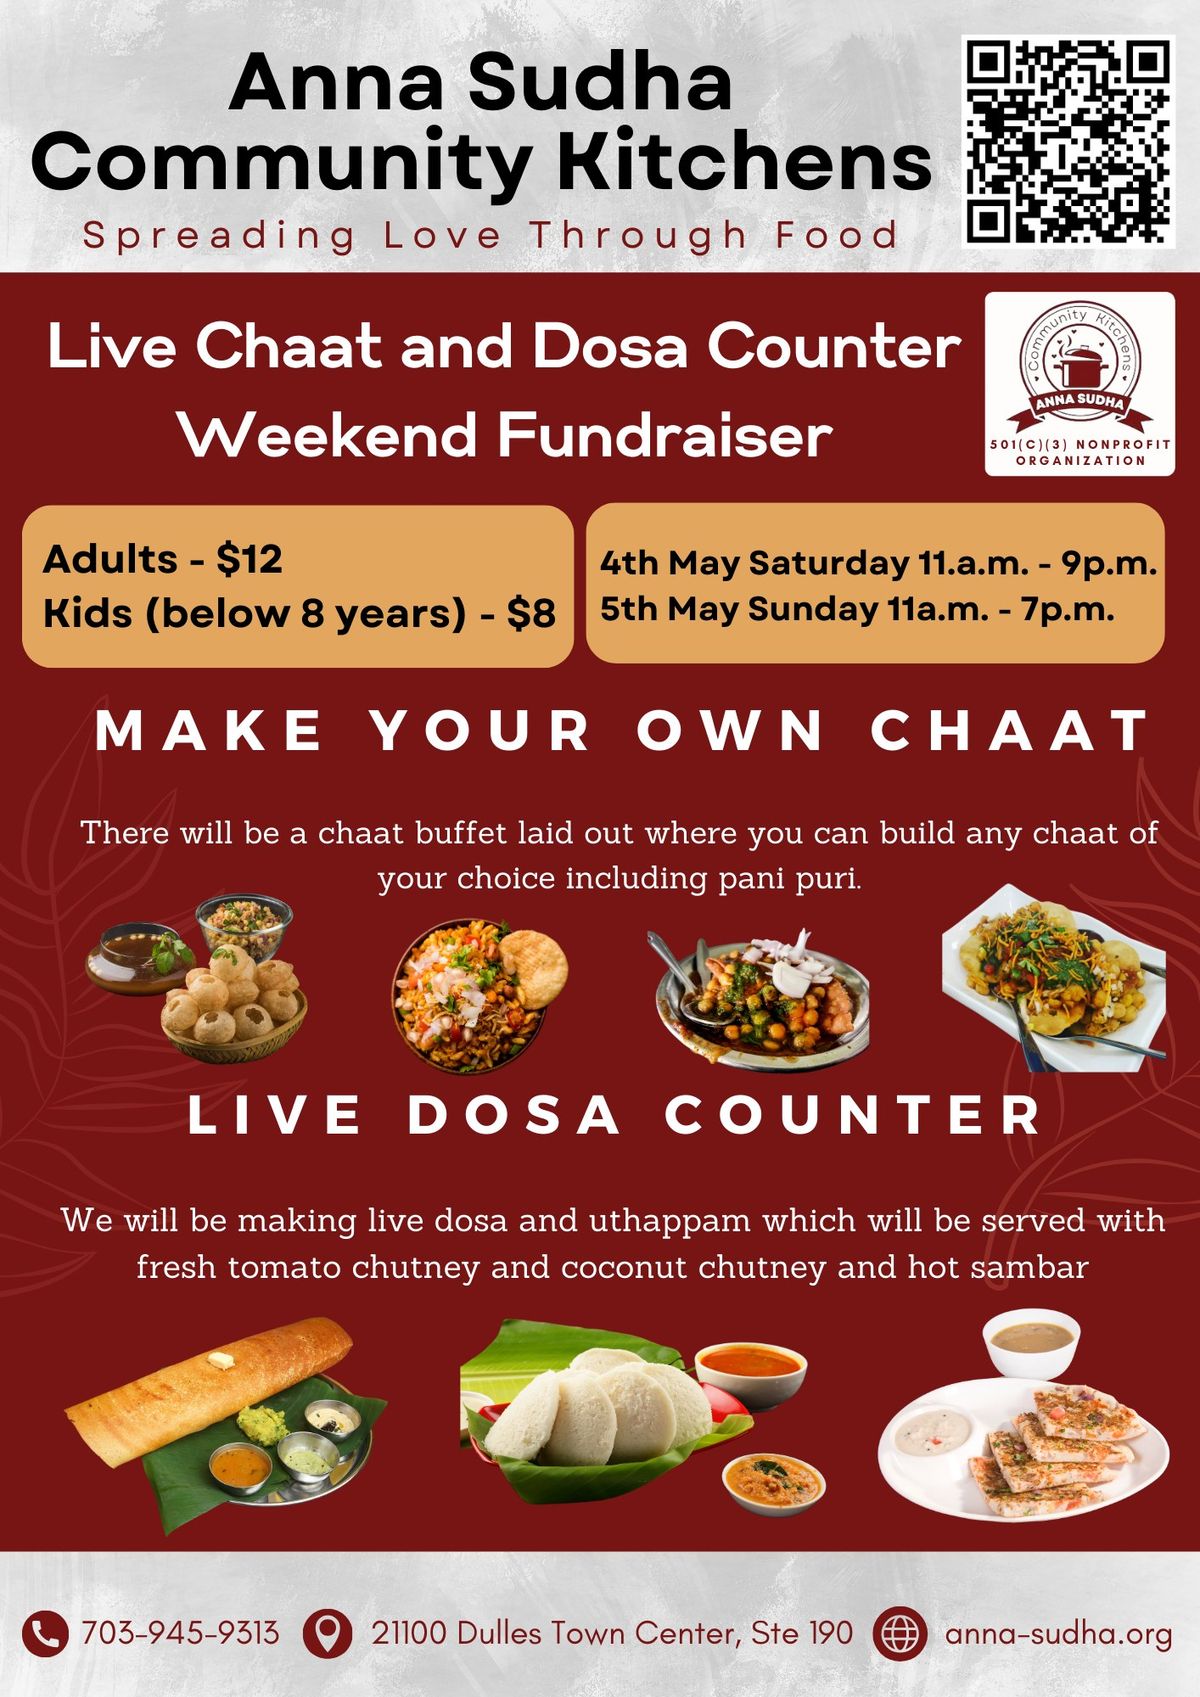 Live Chaat and Dosa Counter Weekend Fundraiser